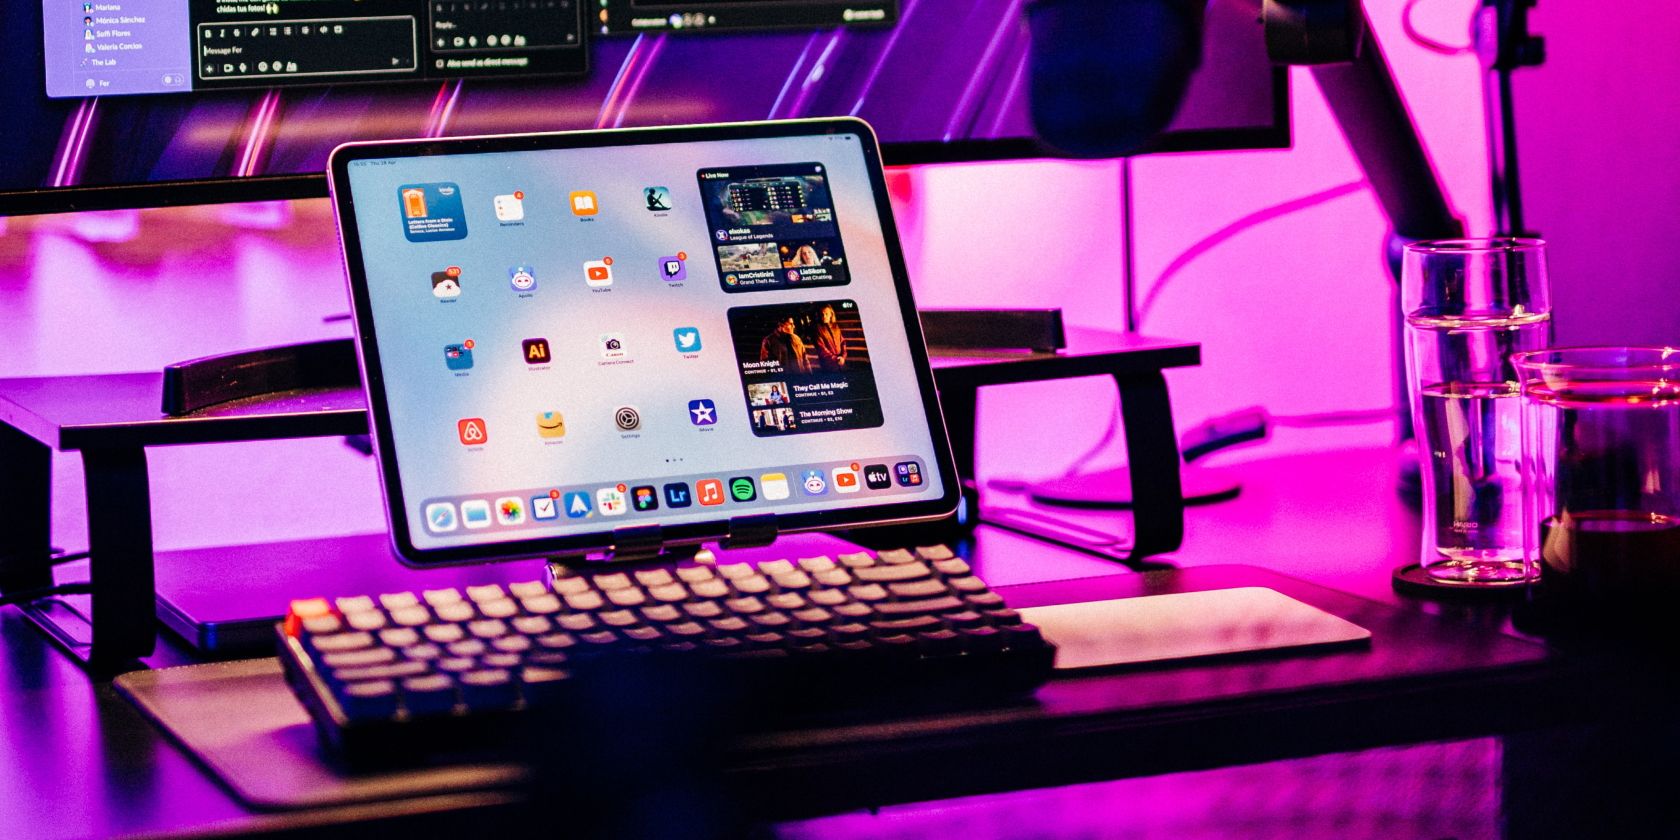 iPad on a desk next to a keyboard